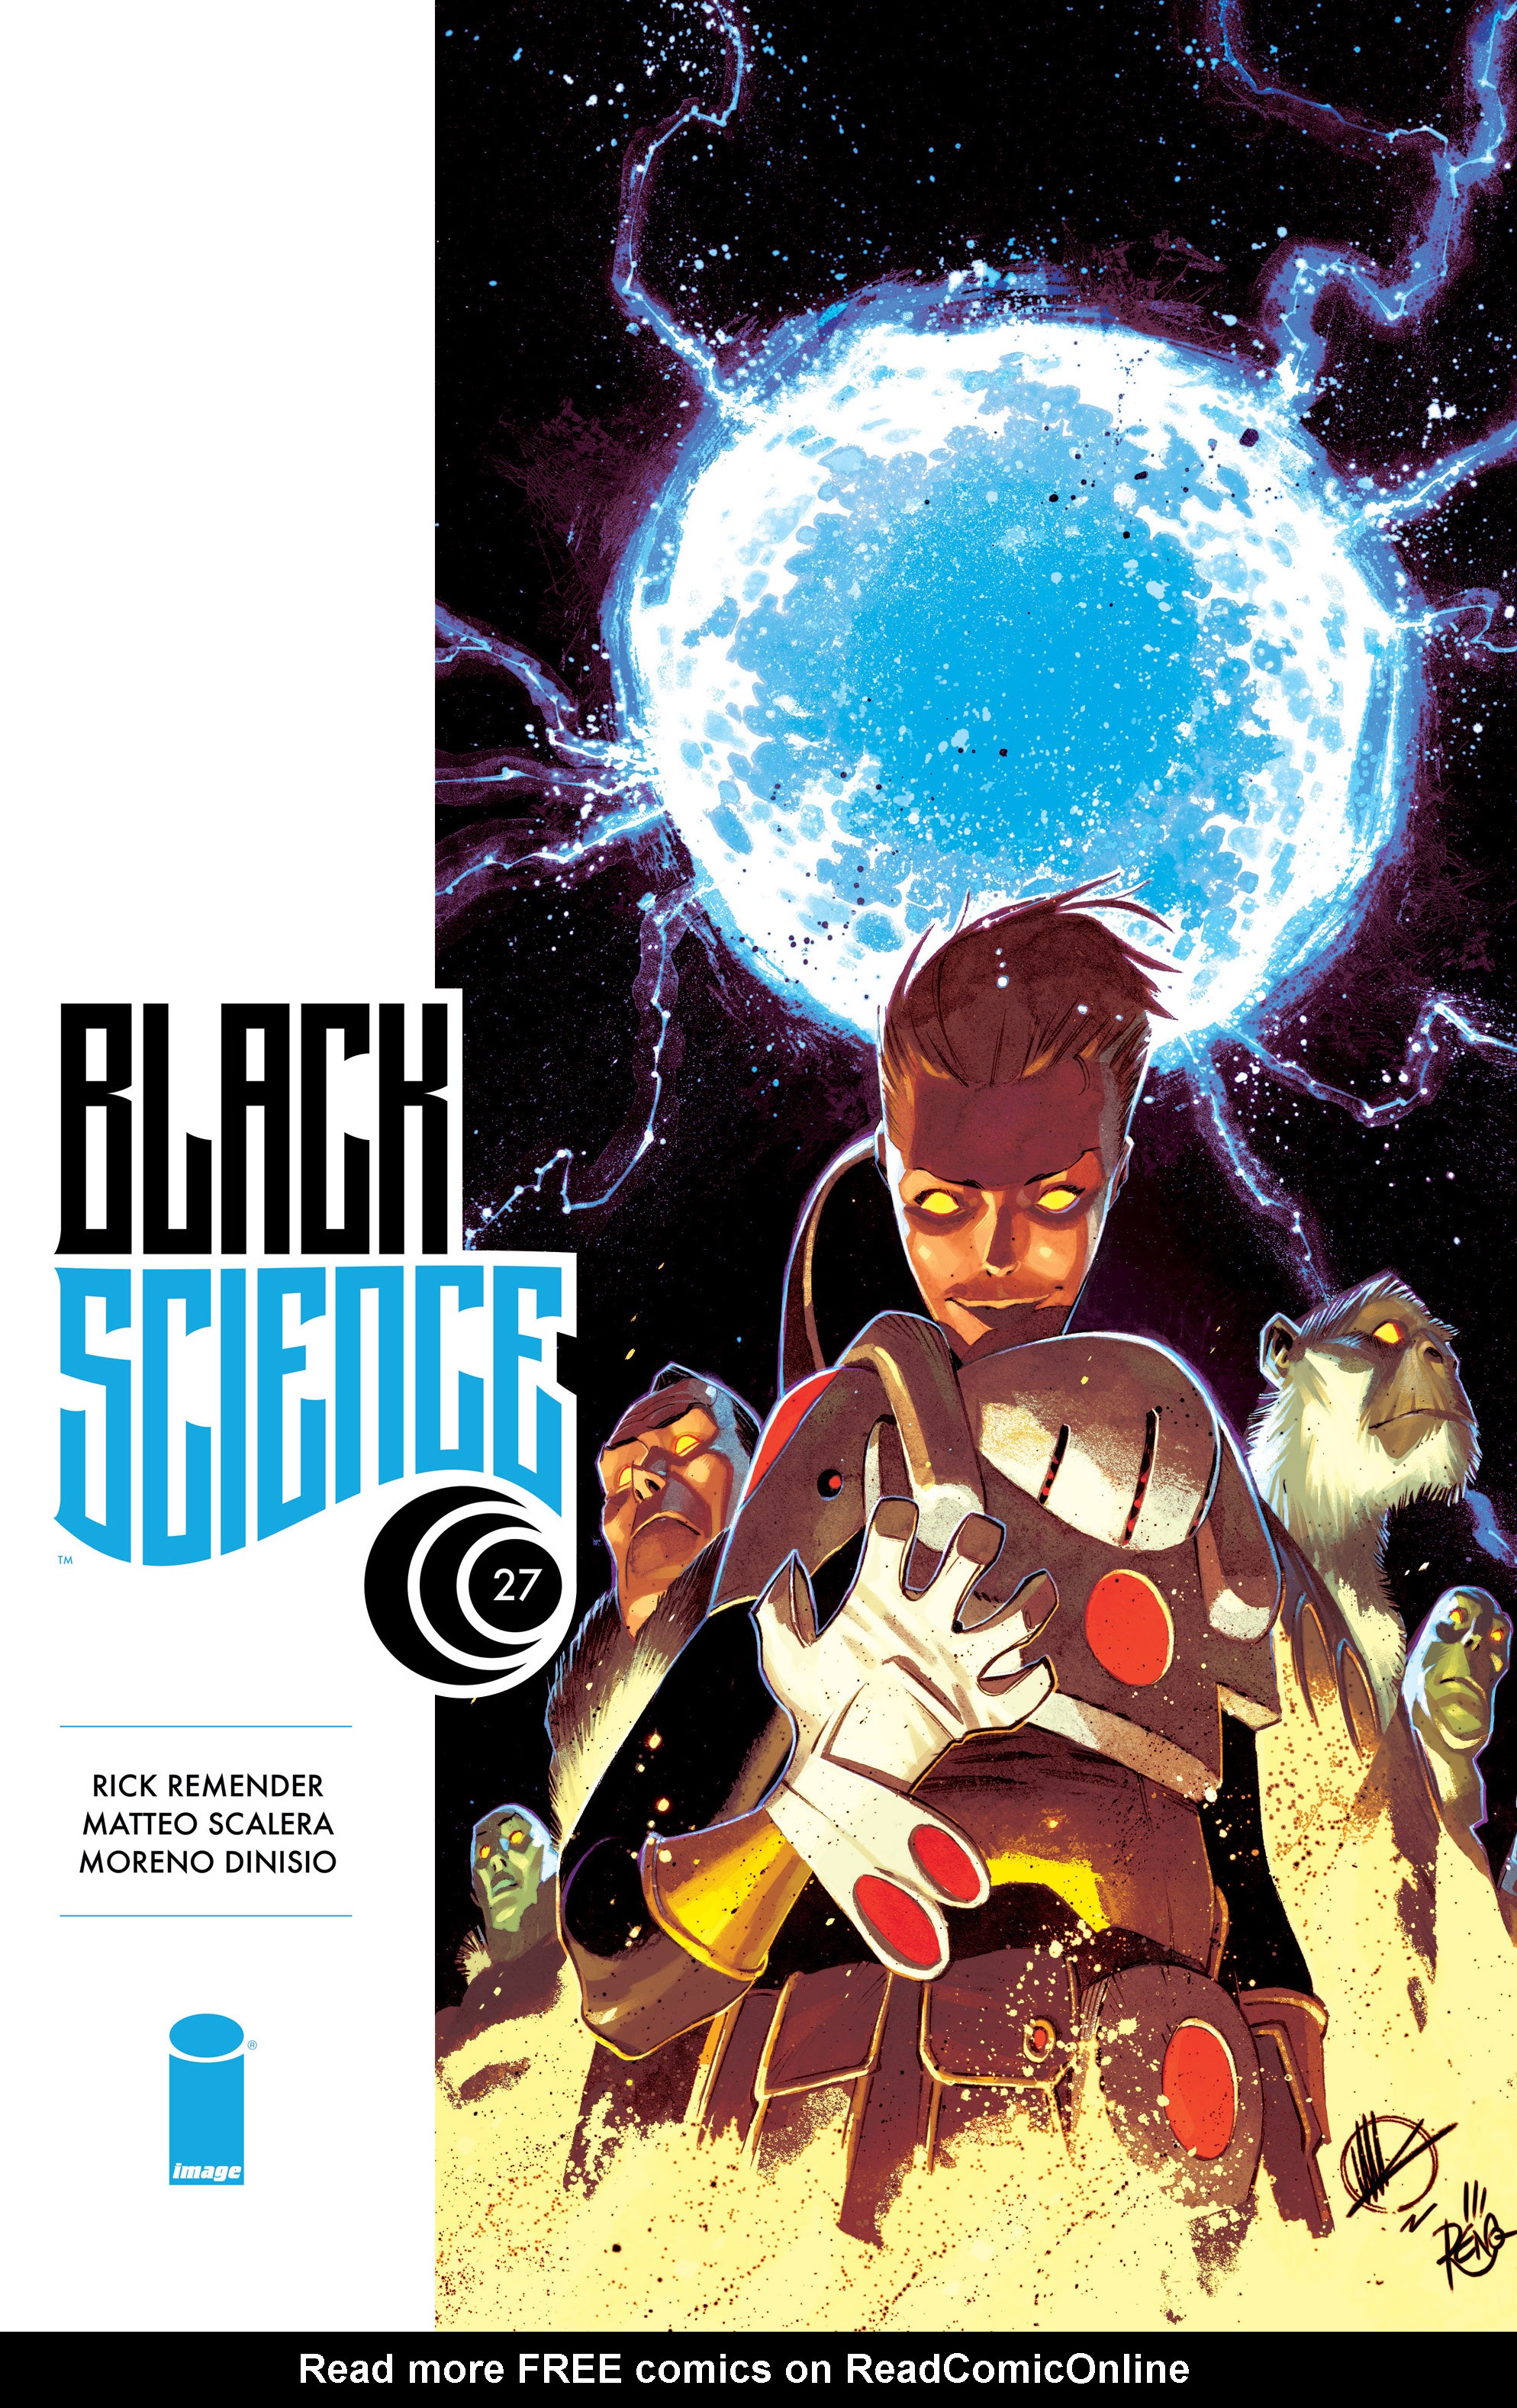 Read online Black Science comic -  Issue #27 - 1